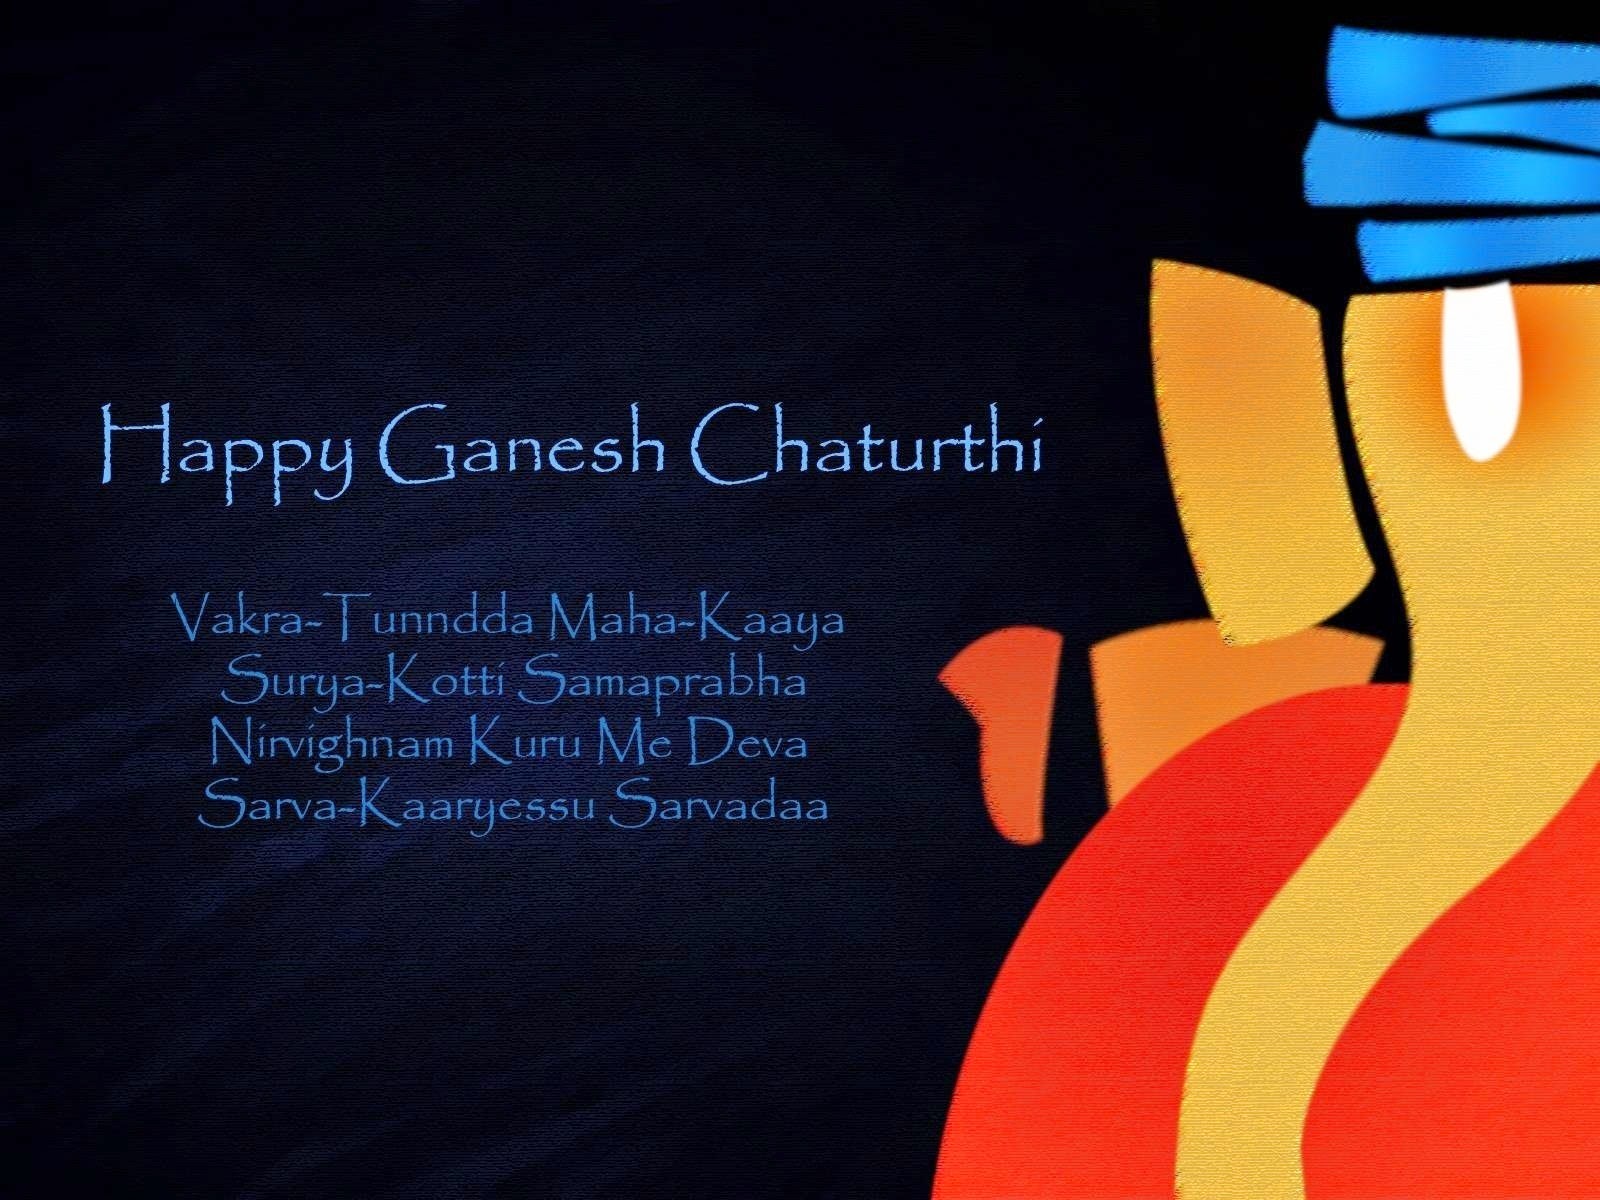 Ganesh Chaturthi SMS Wishes, Messages, Greetings to celebrate the Occasion